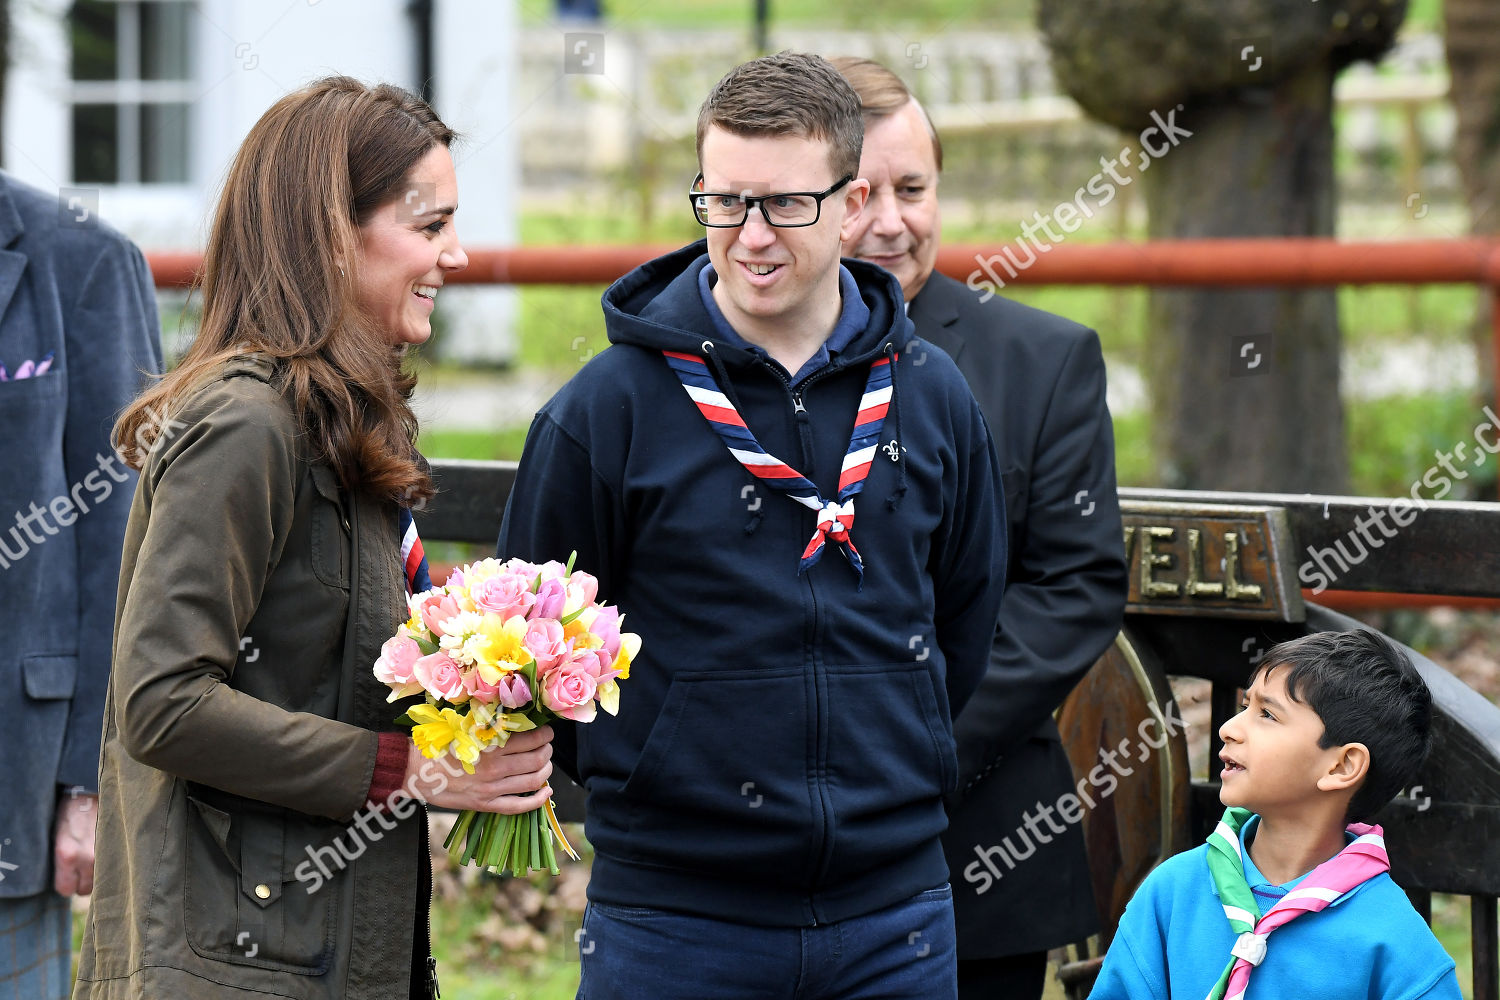 catherine-duchess-of-cambridge-visit-to-the-scouts-gilwell-park-essex-uk-shutterstock-editorial-10179979b.jpg